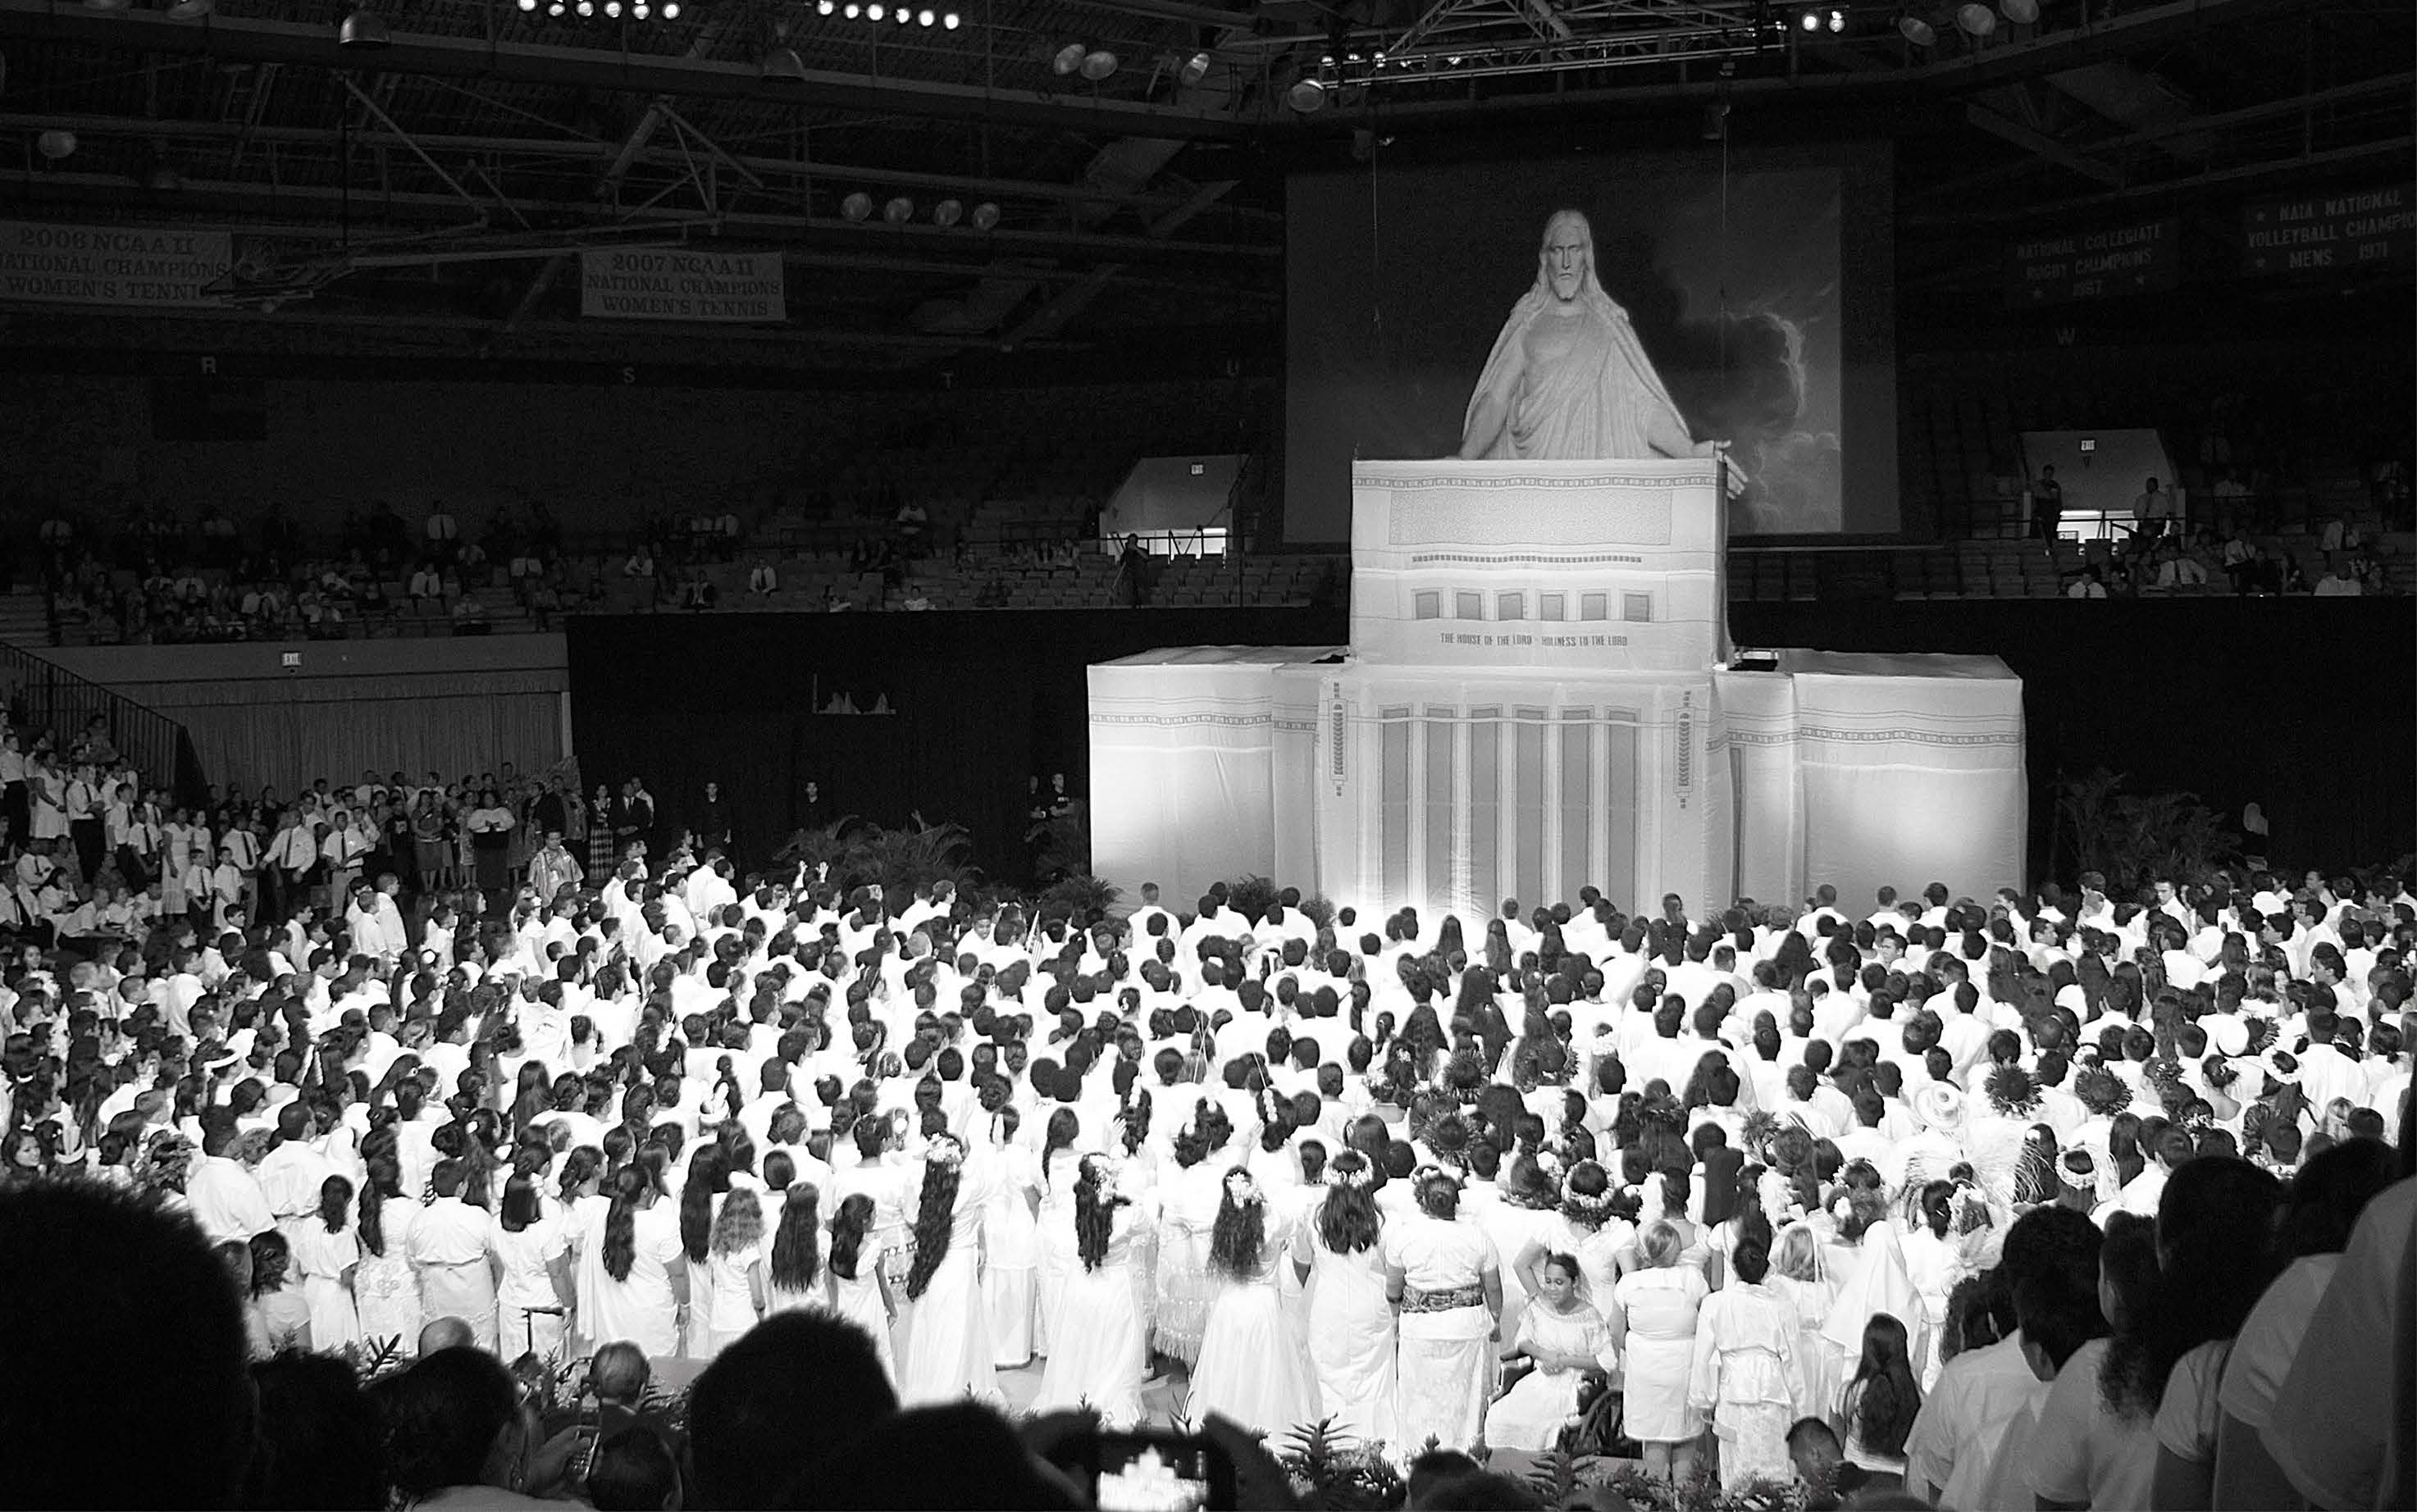 As part of a cultural celebration for the temple’s rededication, youth reenacted the coming forth of the Church in Hawaiʻi. Photo of culminating scene courtesy of Mike Foley. In his remarks President Thomas S. Monson told the youth that the Laie Hawaii Temple “shines as a beacon of righteousness to all who behold its light.” Photo courtesy of Monique Saenz.